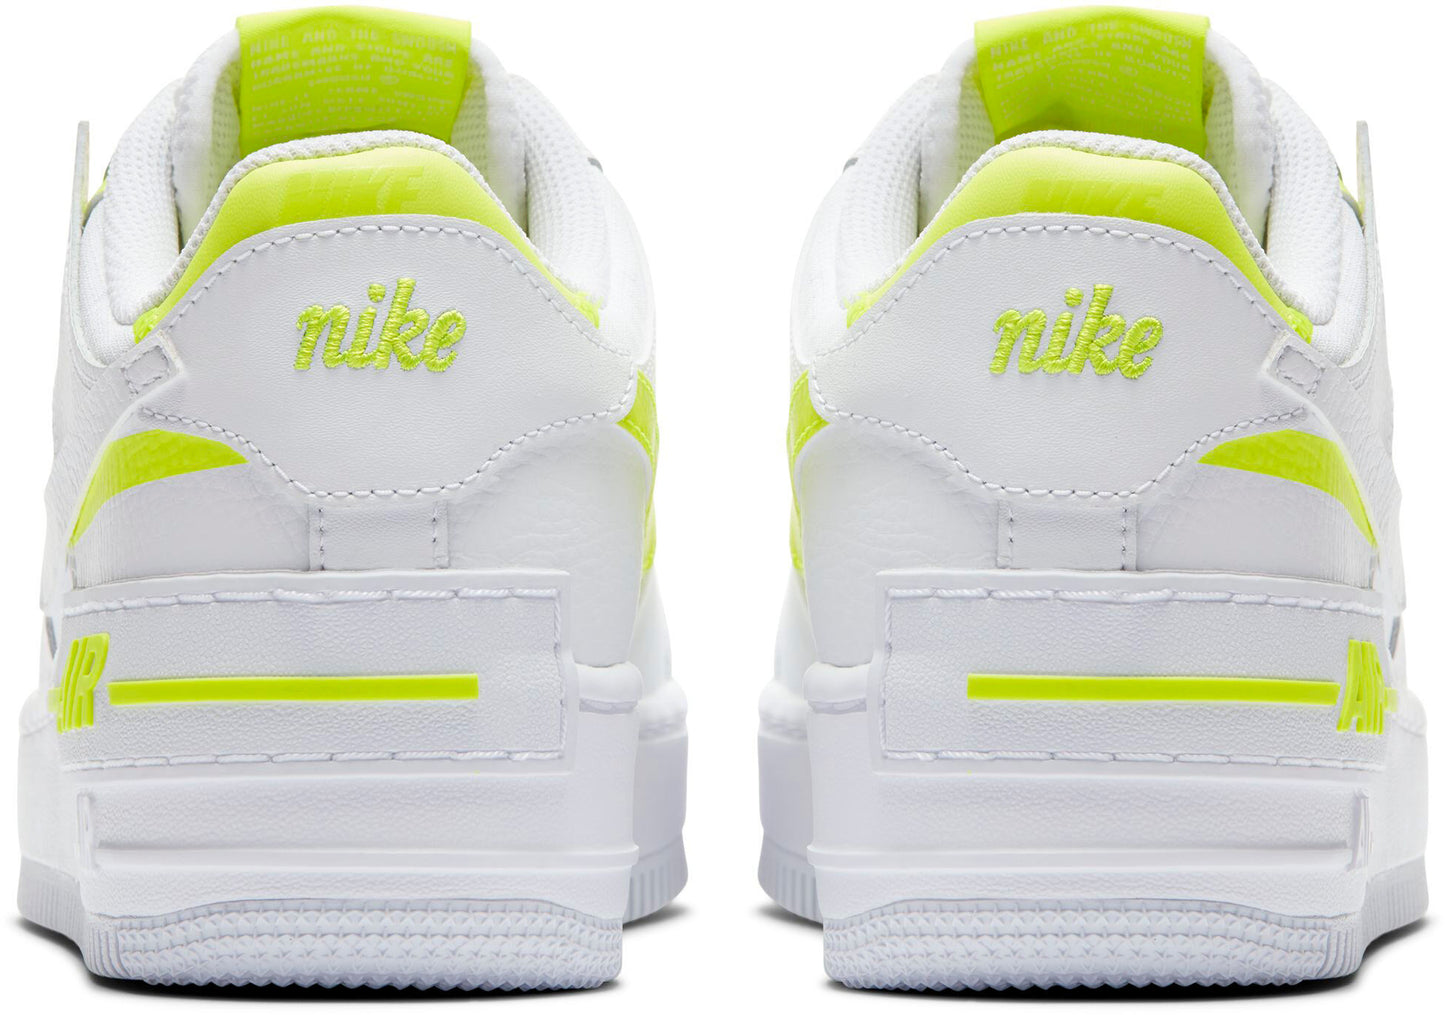 Nike Air Force 1 Shadow Parcel Shoes for Women (White/Lemon)